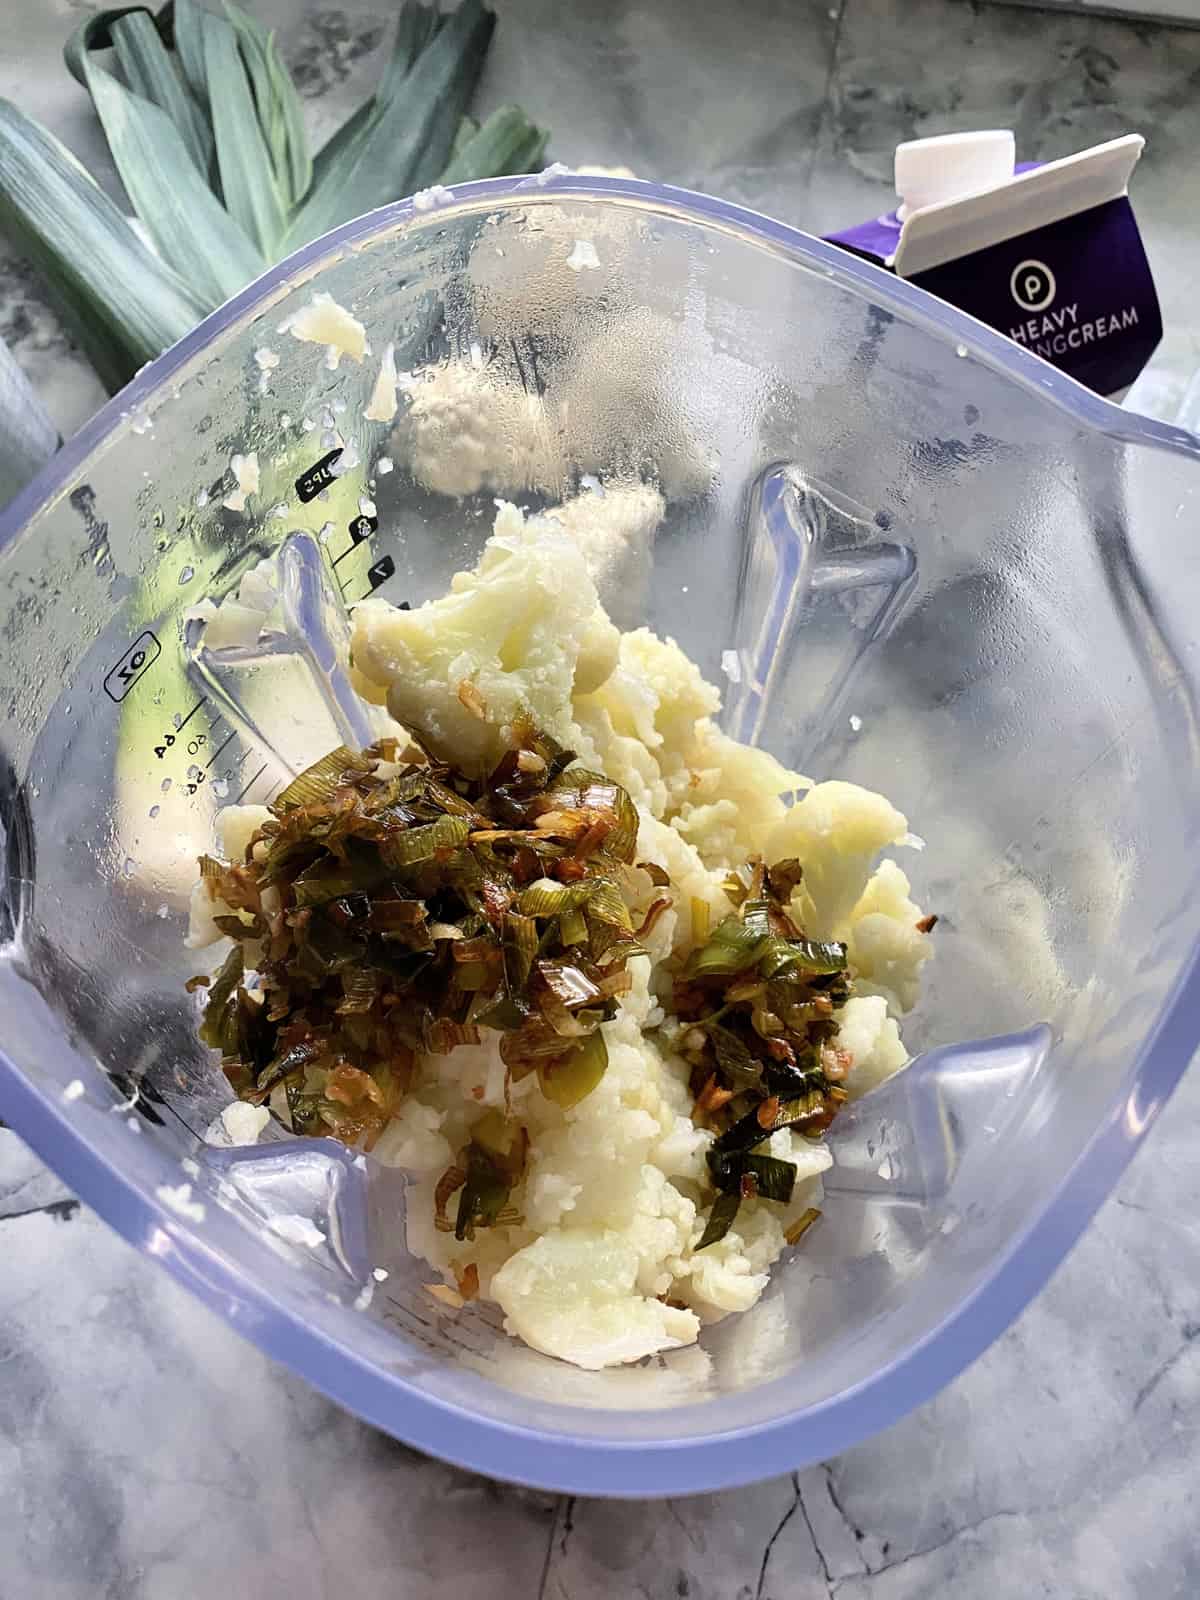 top view of cauliflower, leeks, and spices in blender.